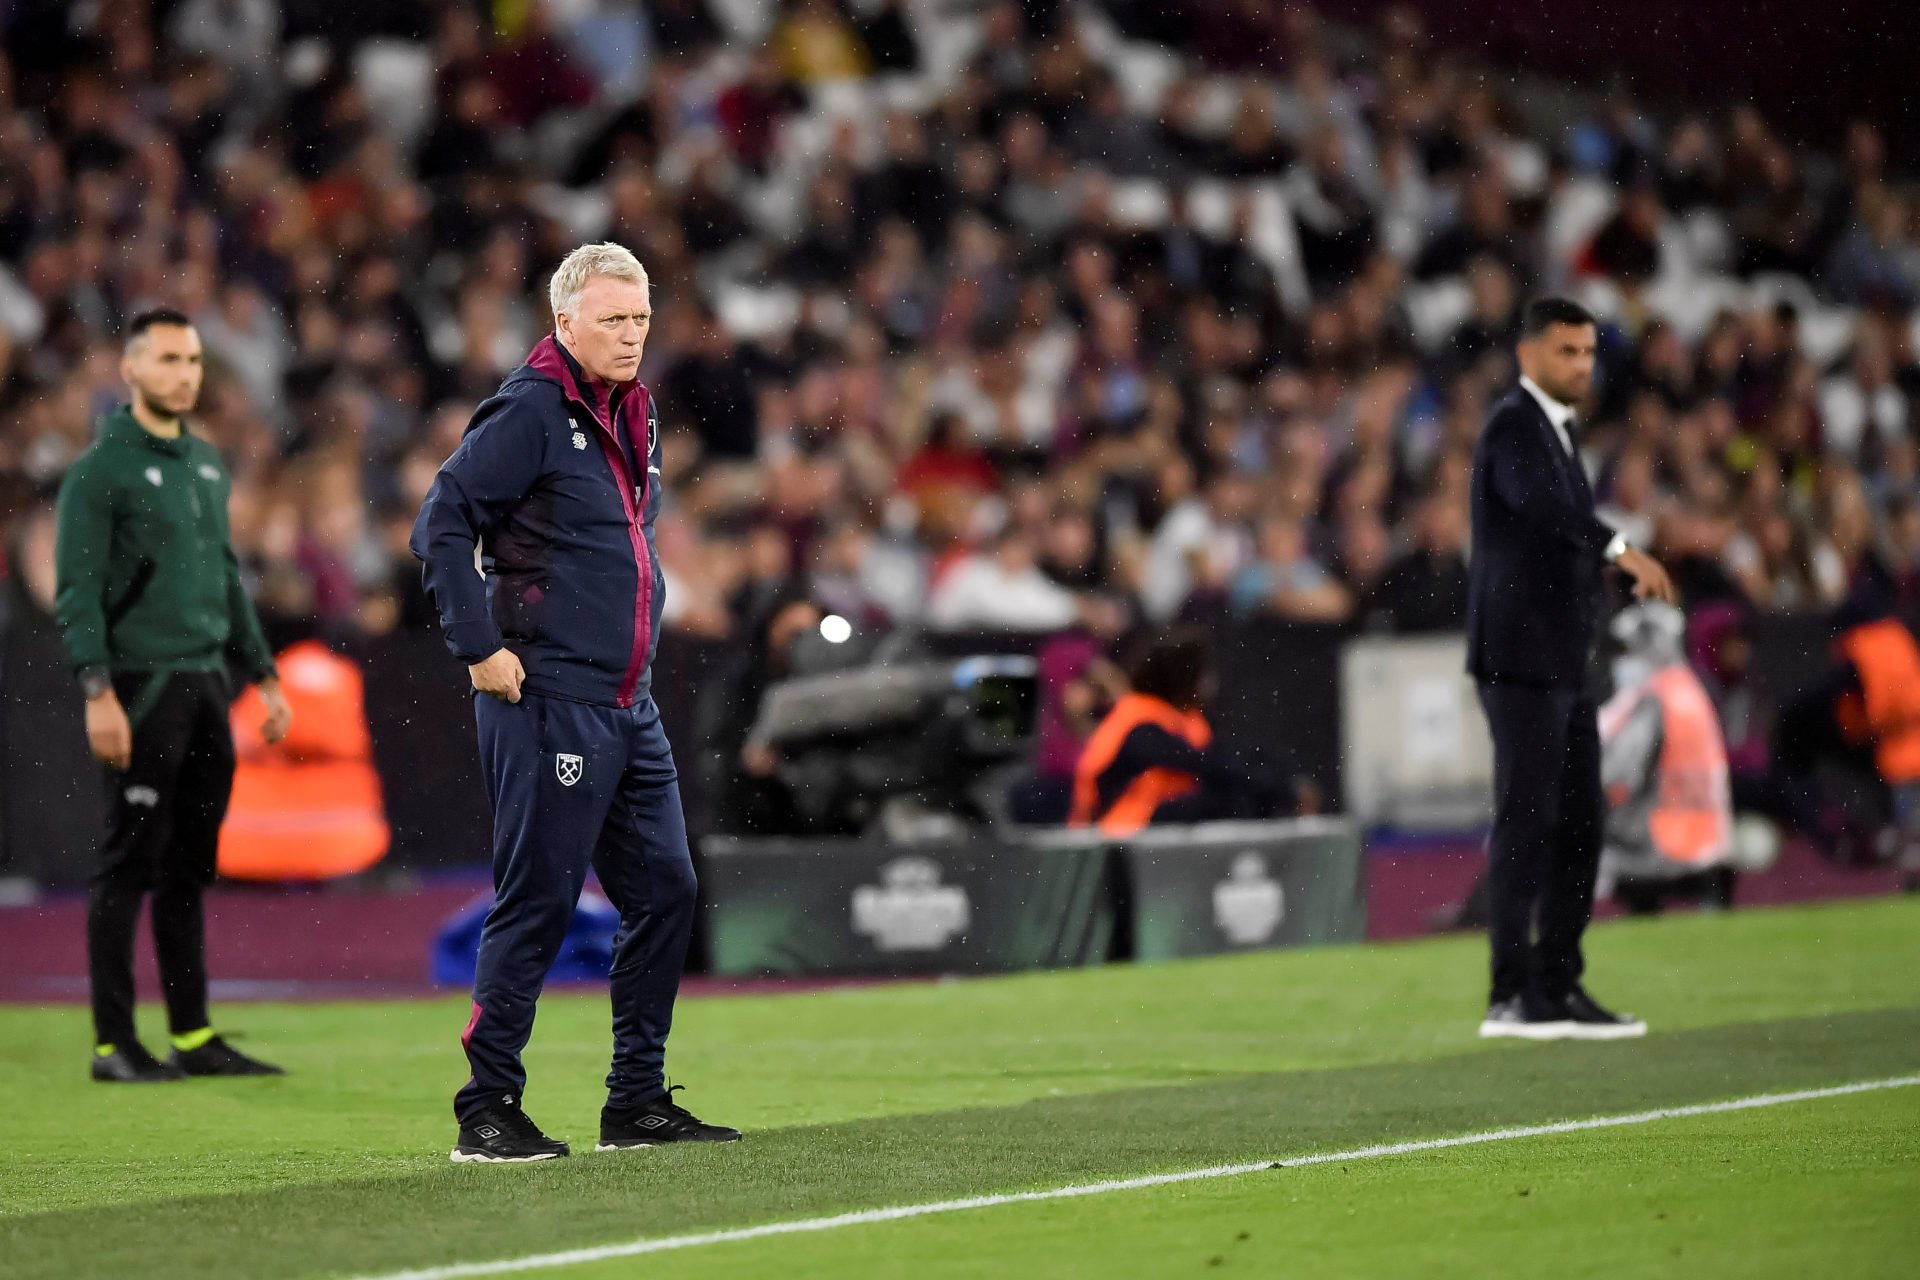 West Ham have reportedly made initial contact with Mauricio Pochettino to replace David Moyes